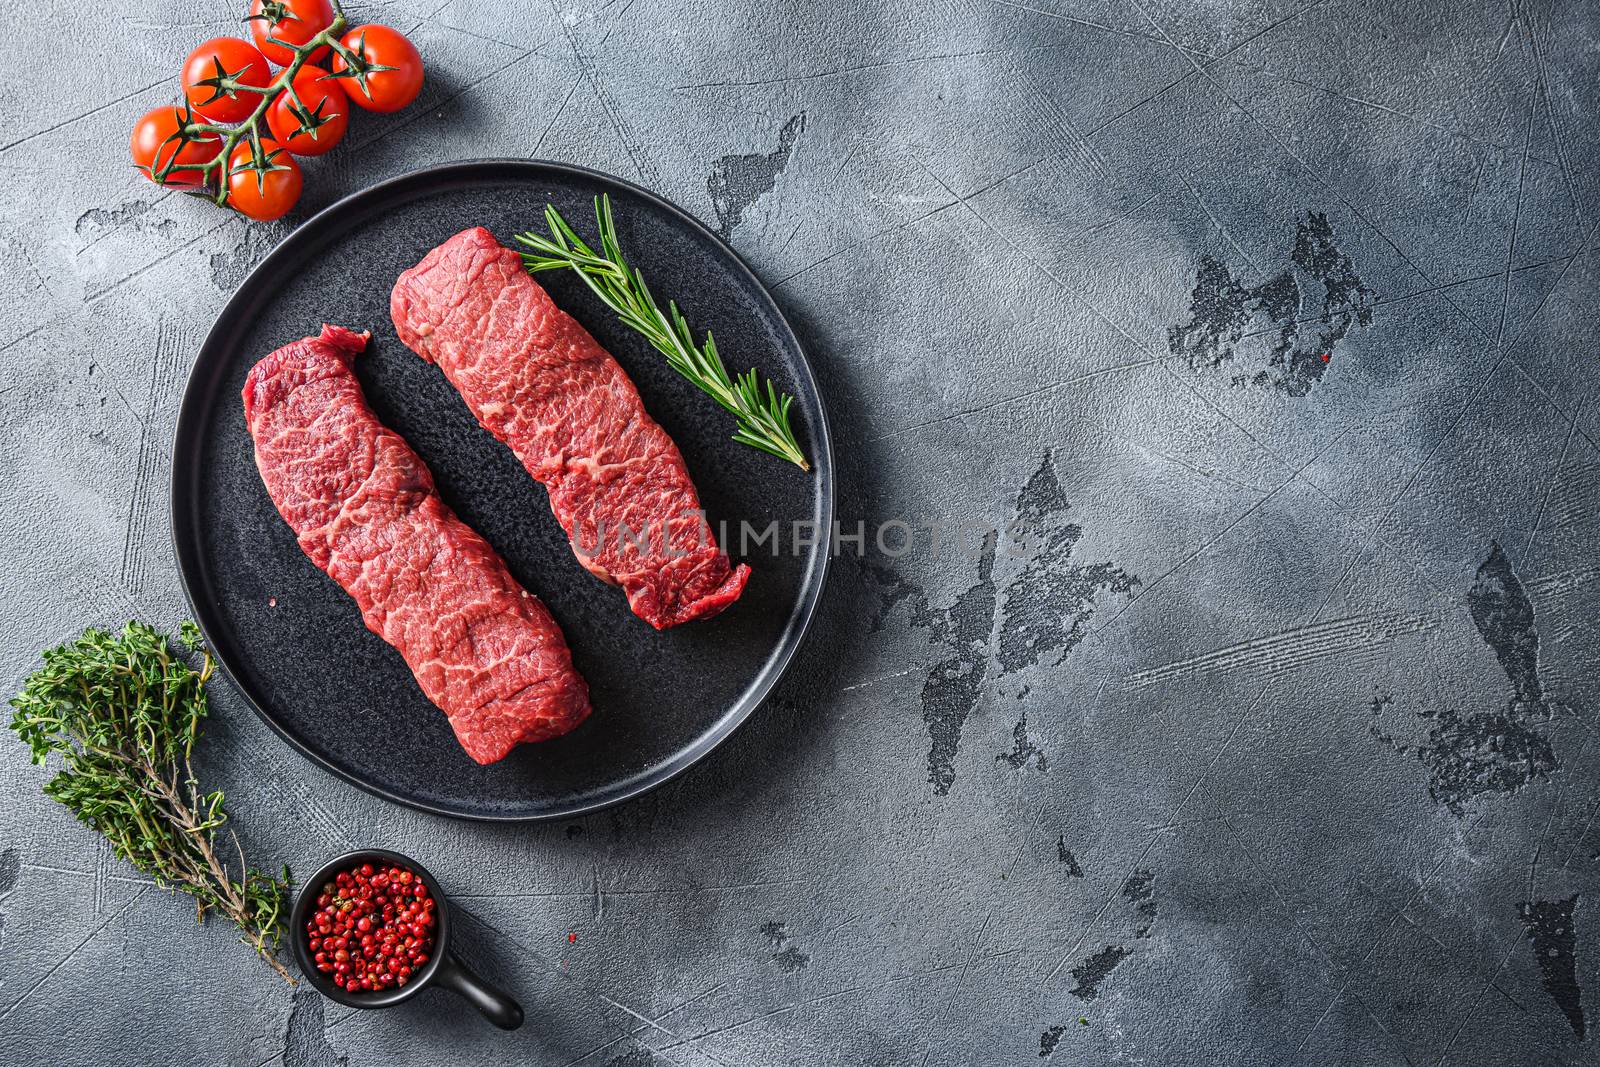 Organic denver steak on black plate , marbled beef with herbs tomatoes peppercorns over grey stone surface background top view space for text. by Ilianesolenyi